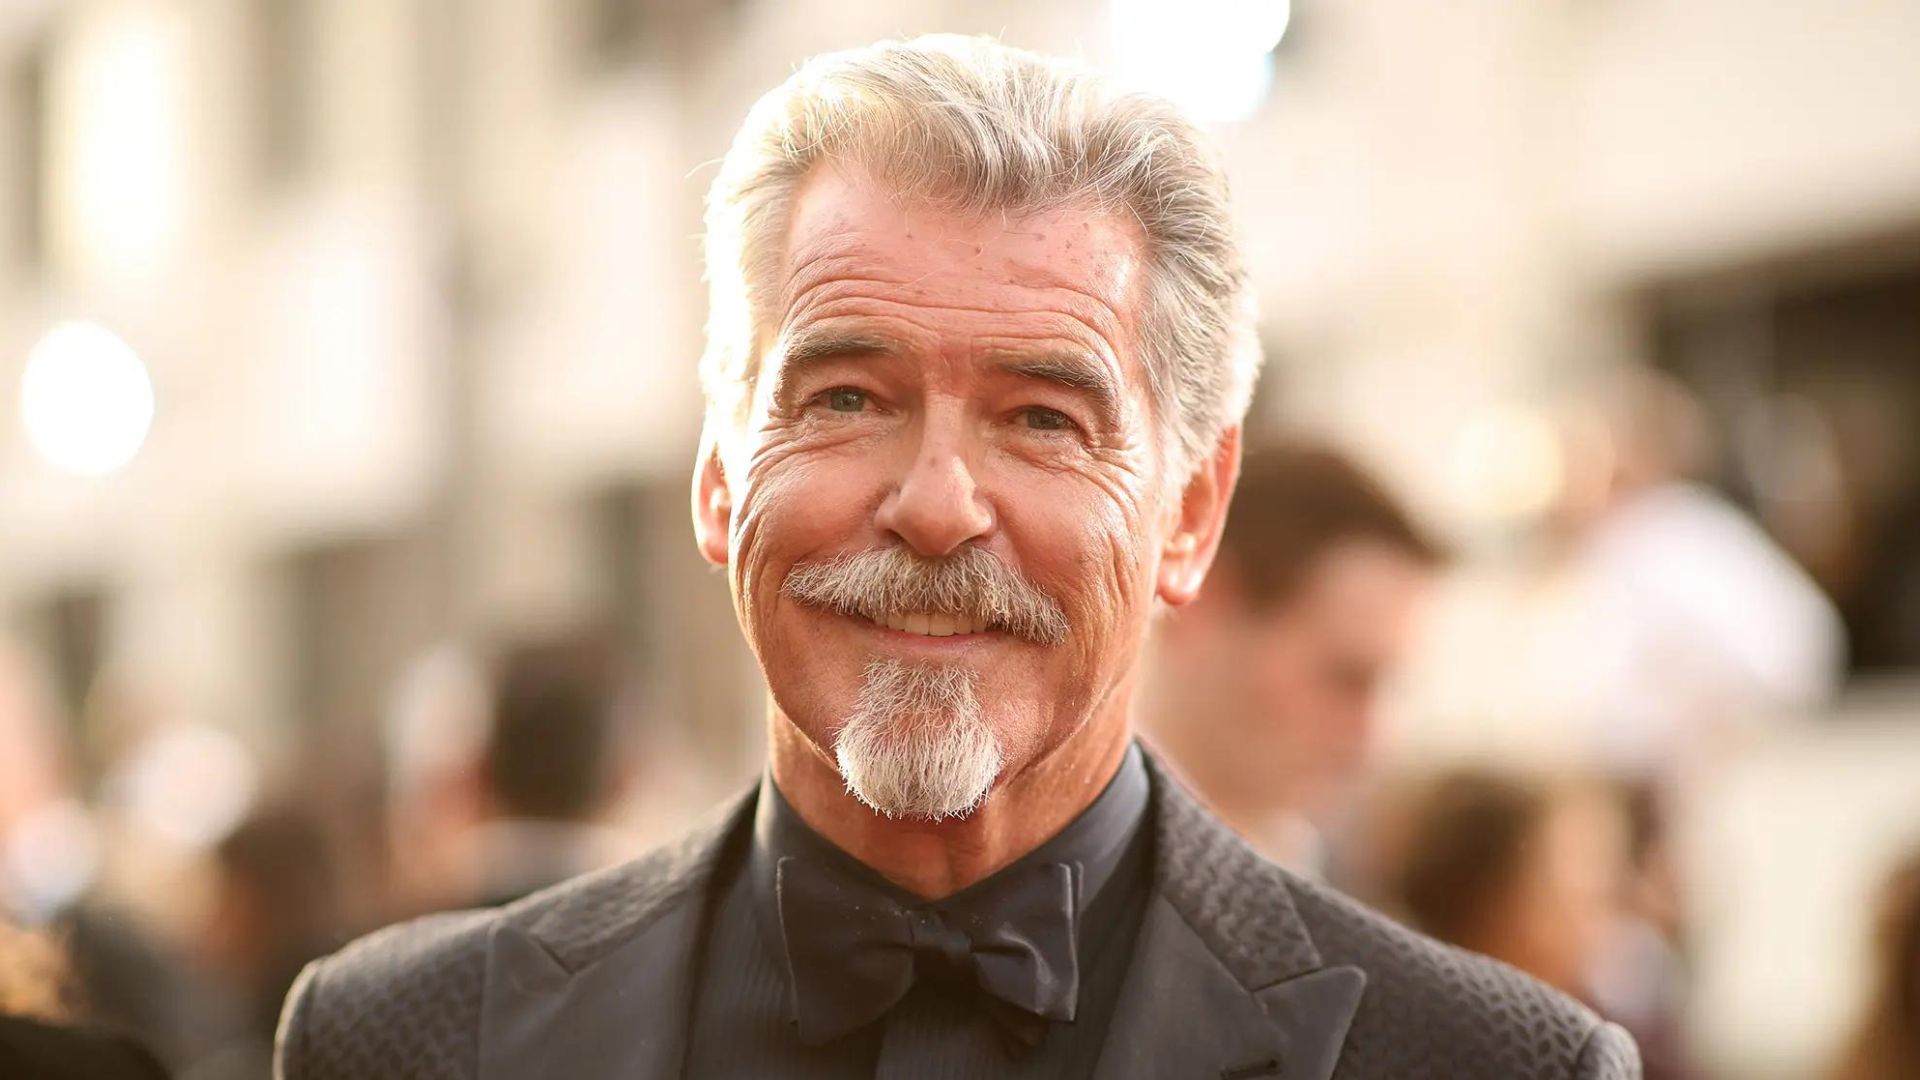 Pierce Brosnan Smiling And Wearing A Suit with Bow Tie